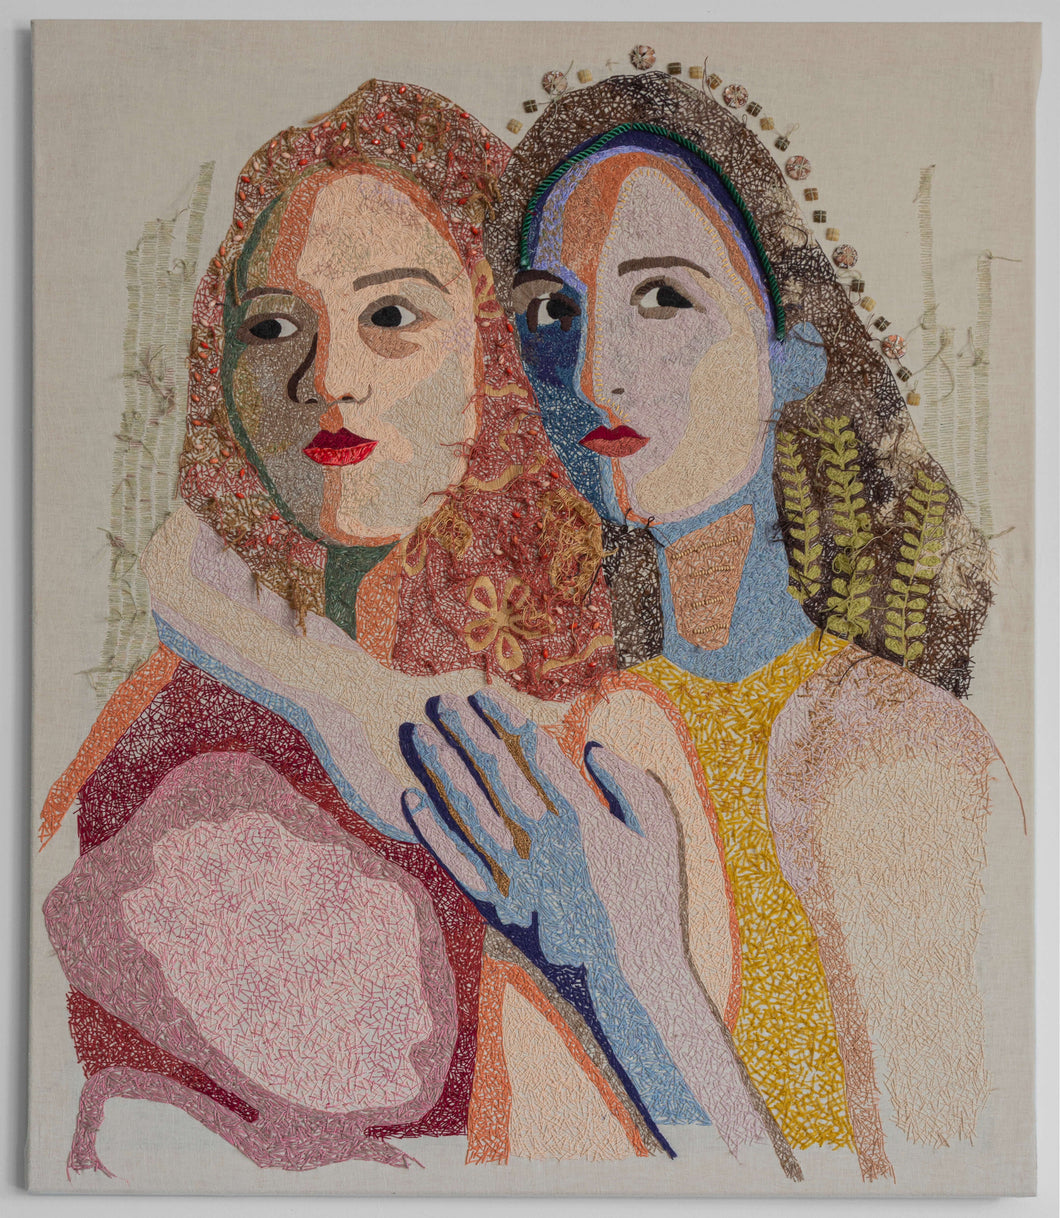 One woman warmly embraces another from behind, her hands on top of one another between the second figure's shoulder and heart. The entire portrait is hand embroidered using differing stitching styles. The face combines a satin stitch technique in unexpected color blocks with a more randomized style to create depth and provide a distinction between features. A variety of blues, greens, pinks, purples, and yellows are used in different gradients to surreal effect.